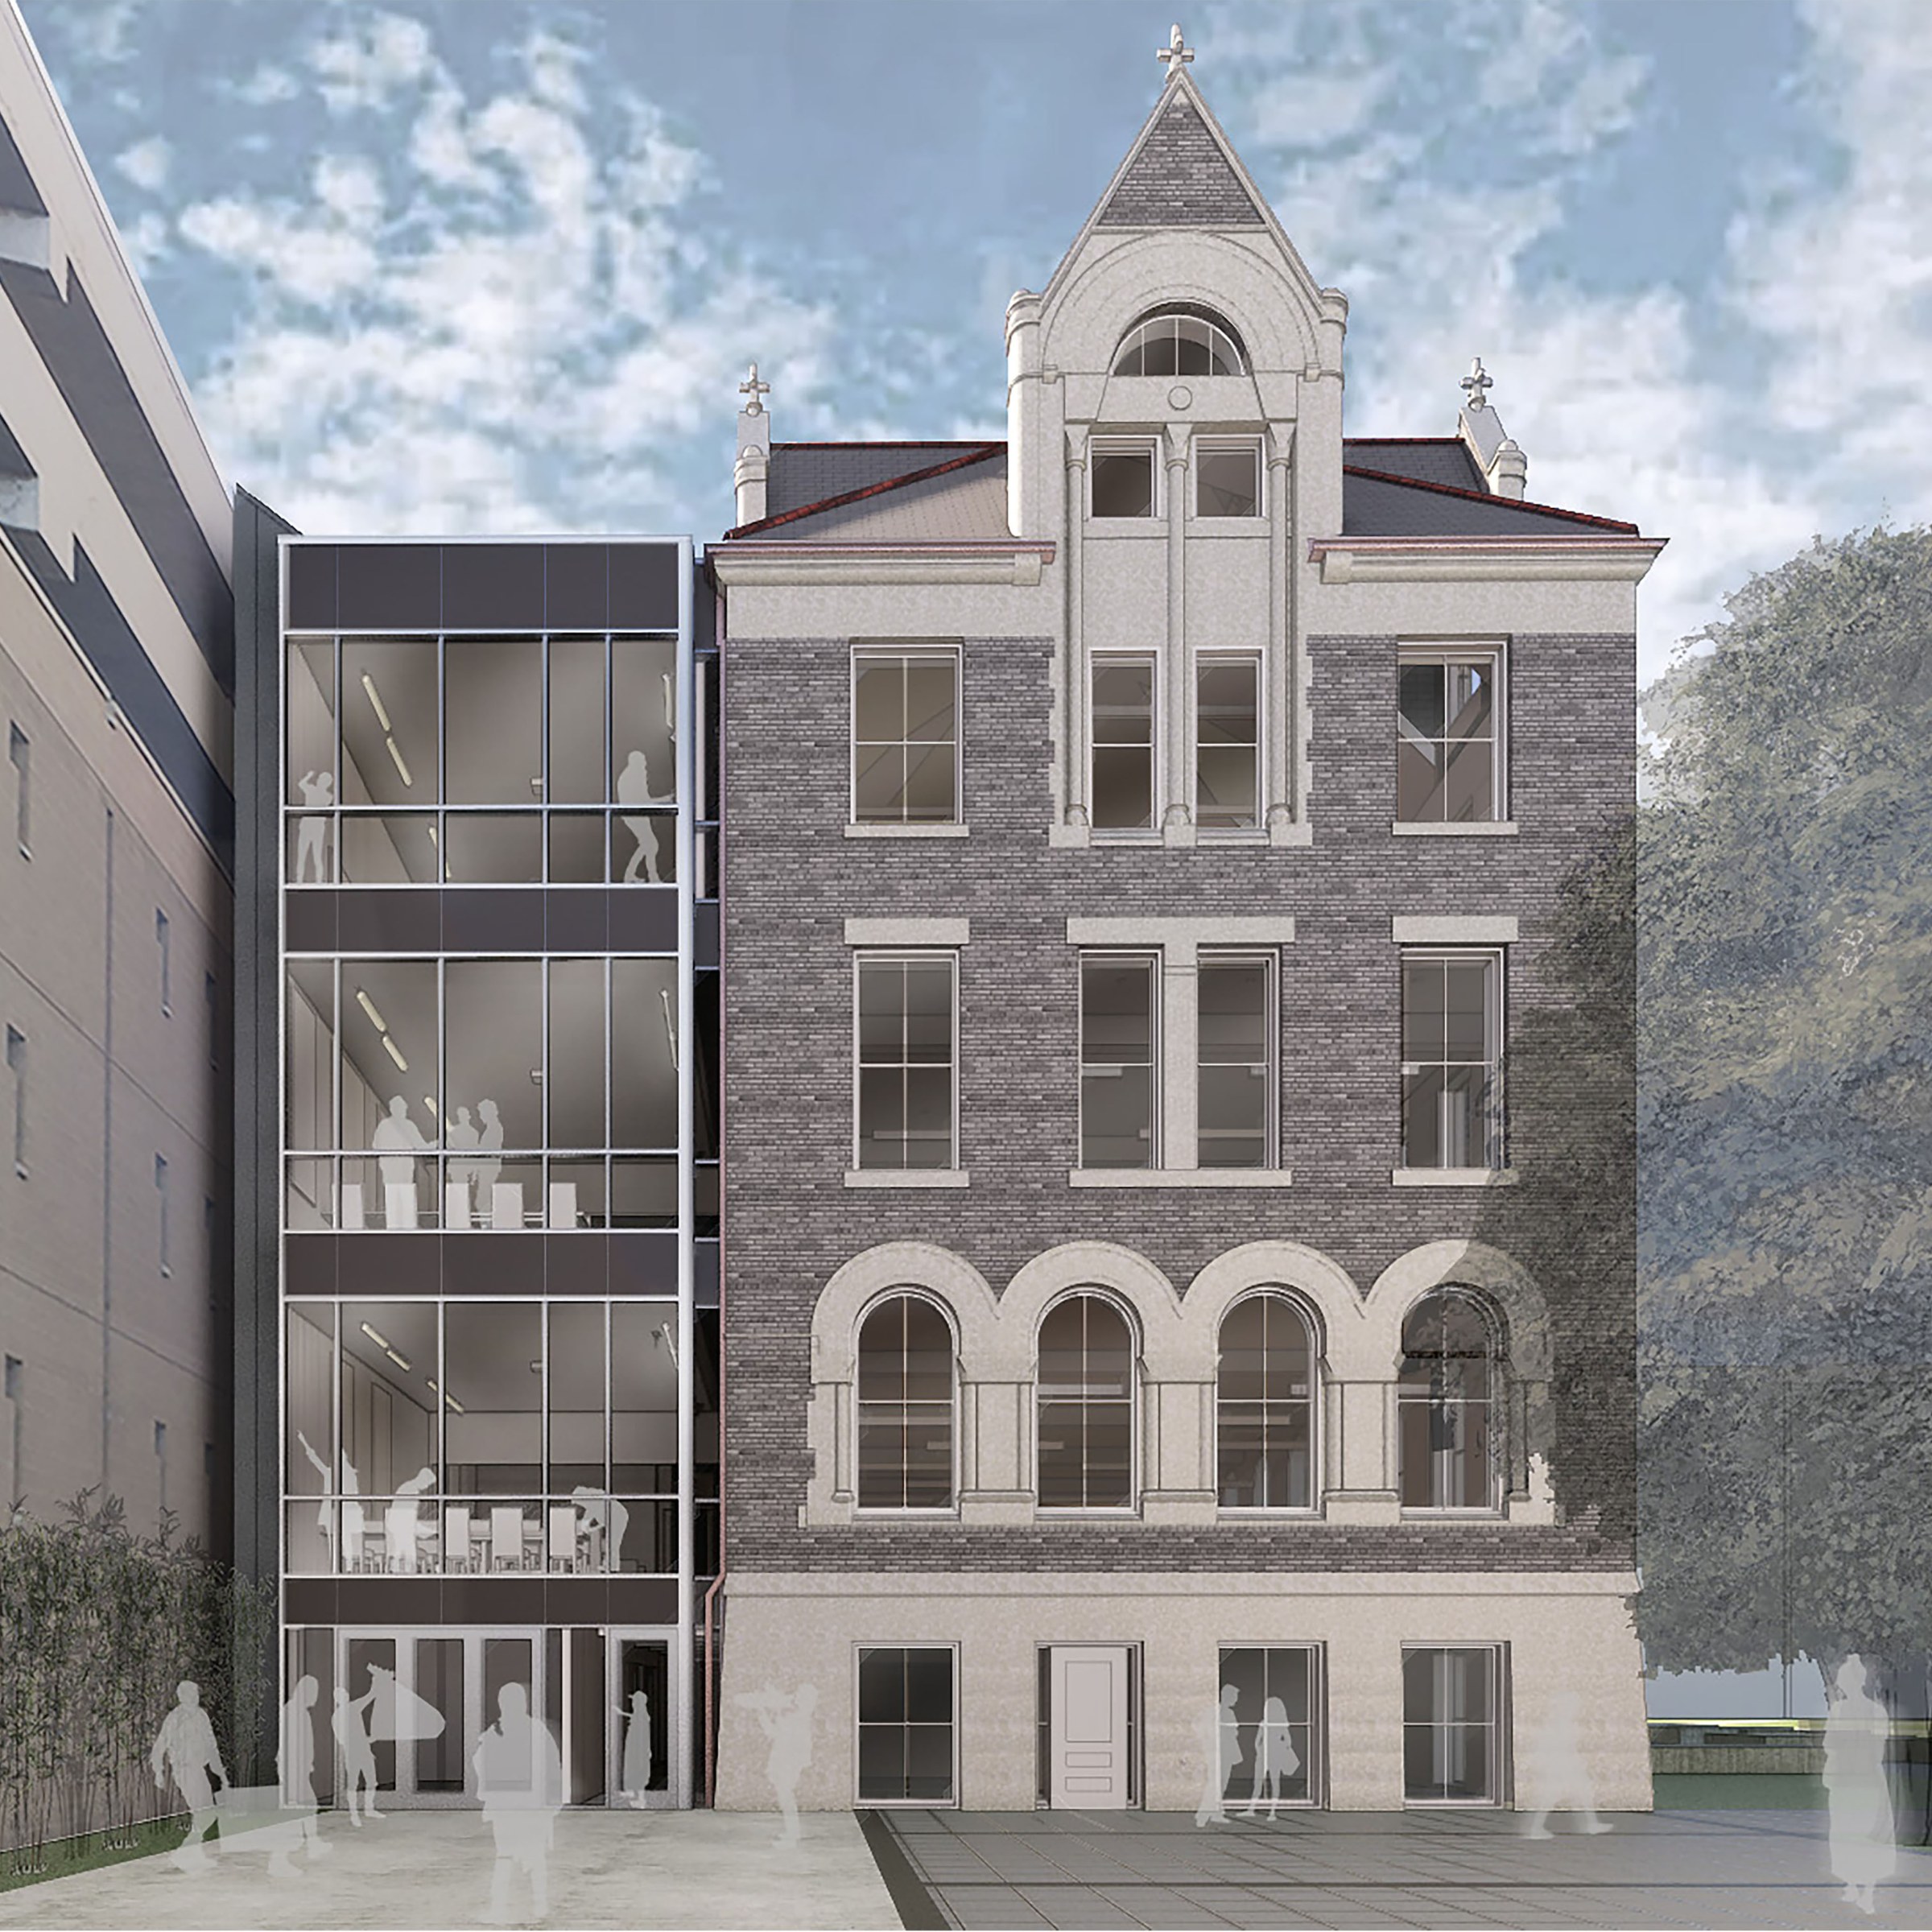 Renovation announced for home of TuSA building